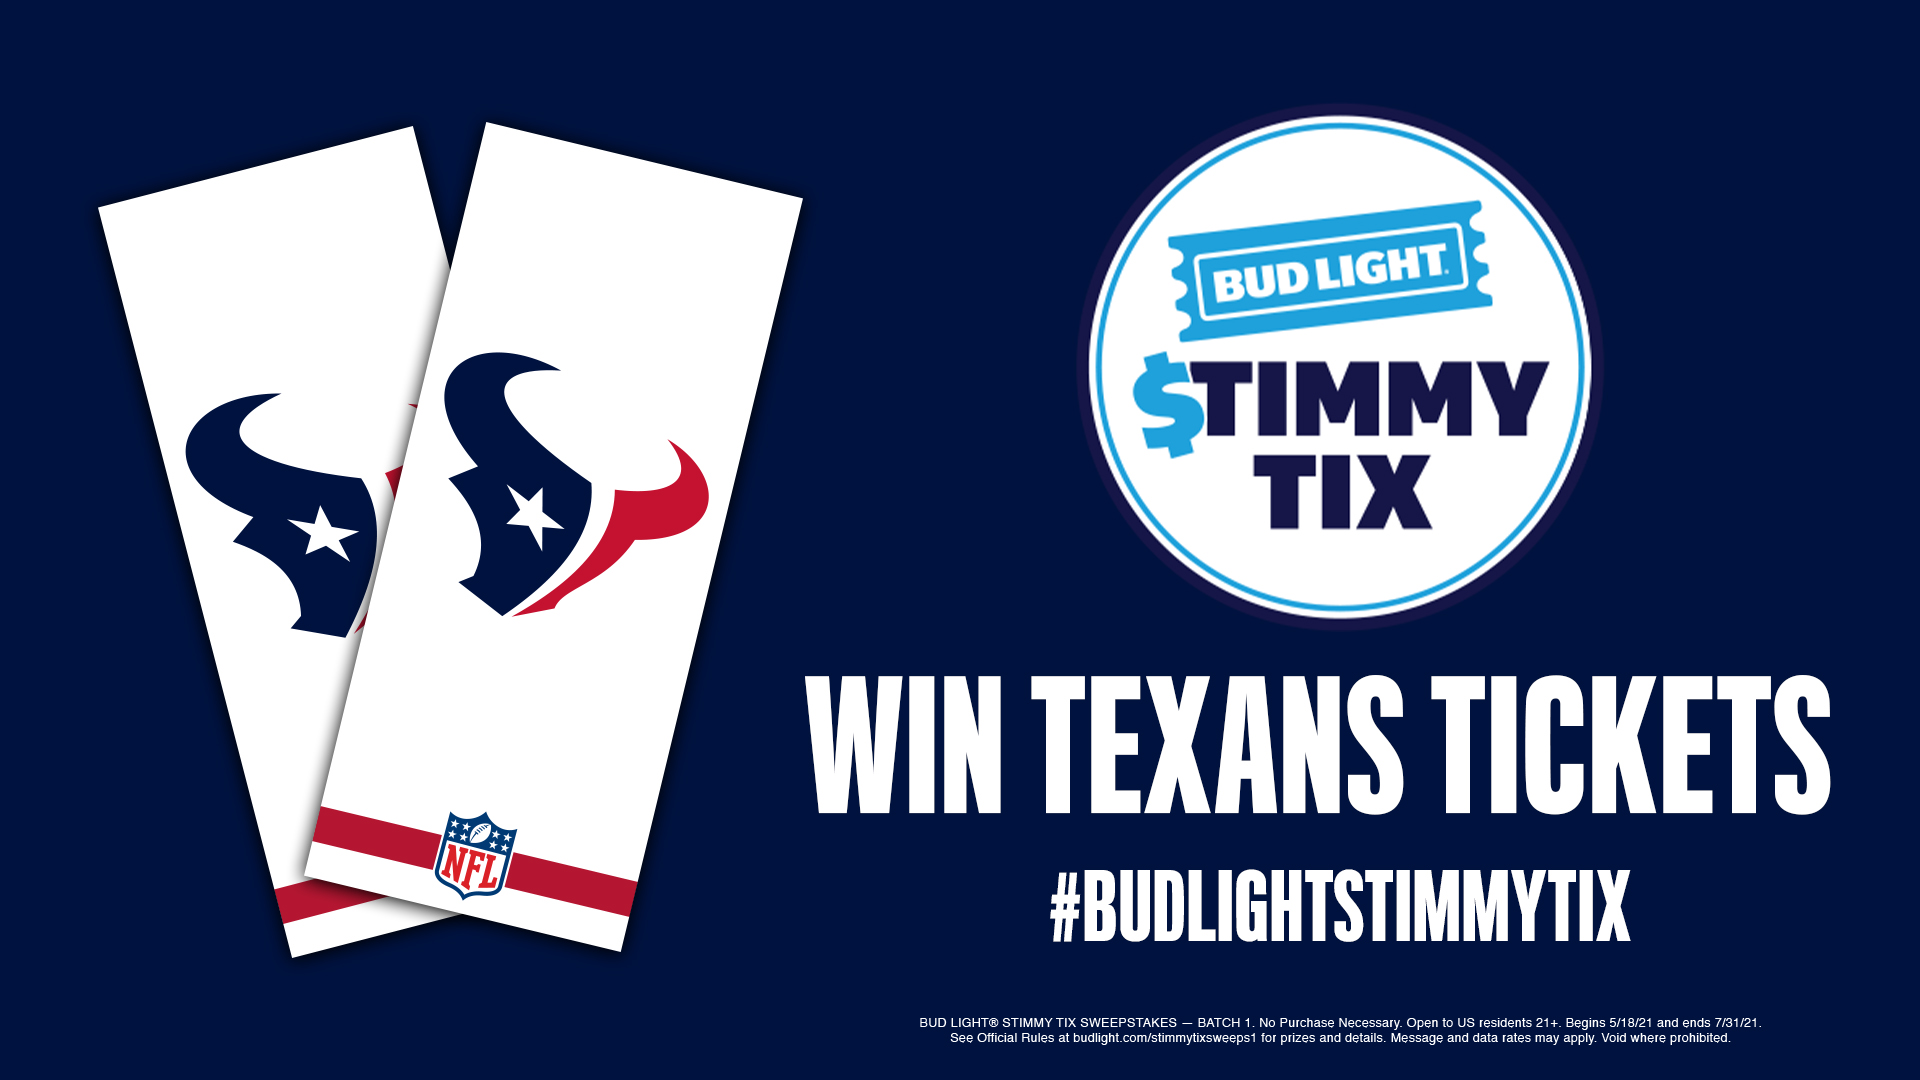 Houston Texans on X: 'Retweet for a chance to win #Texans tickets